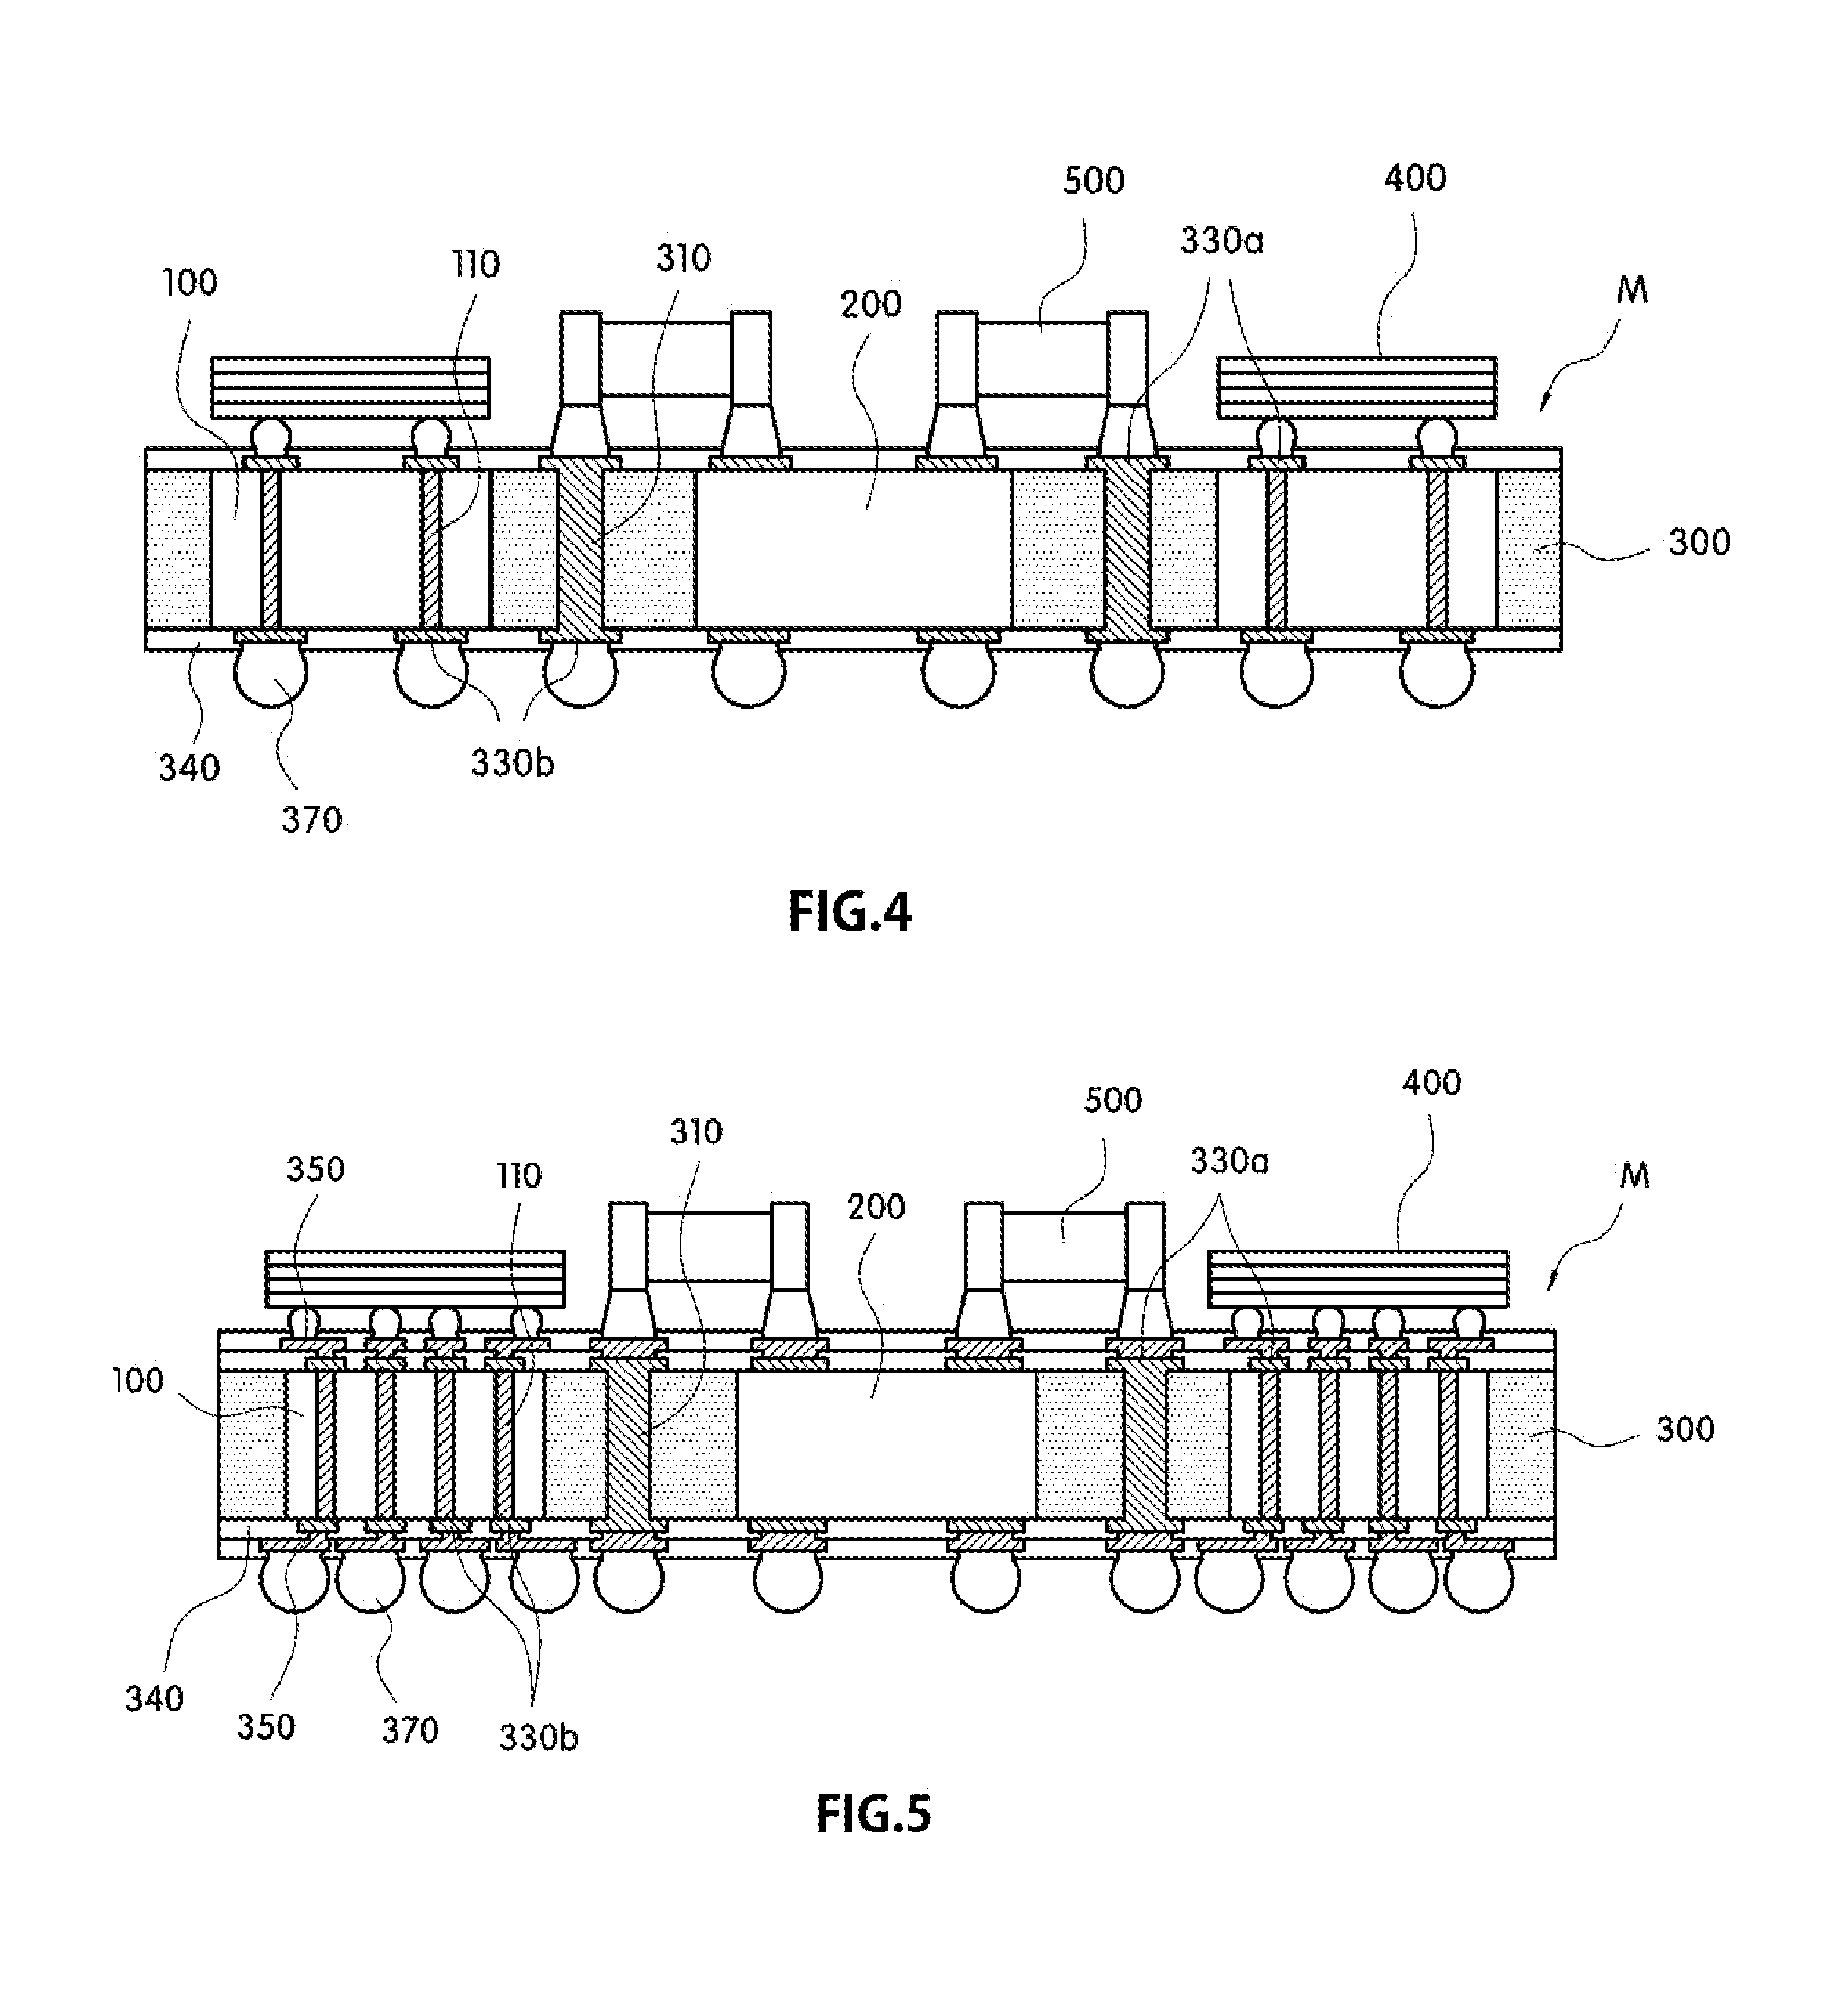 Circuit Board Having Interposer Embedded Therein, Electronic Module Using Same, and Method for Manufacturing Same